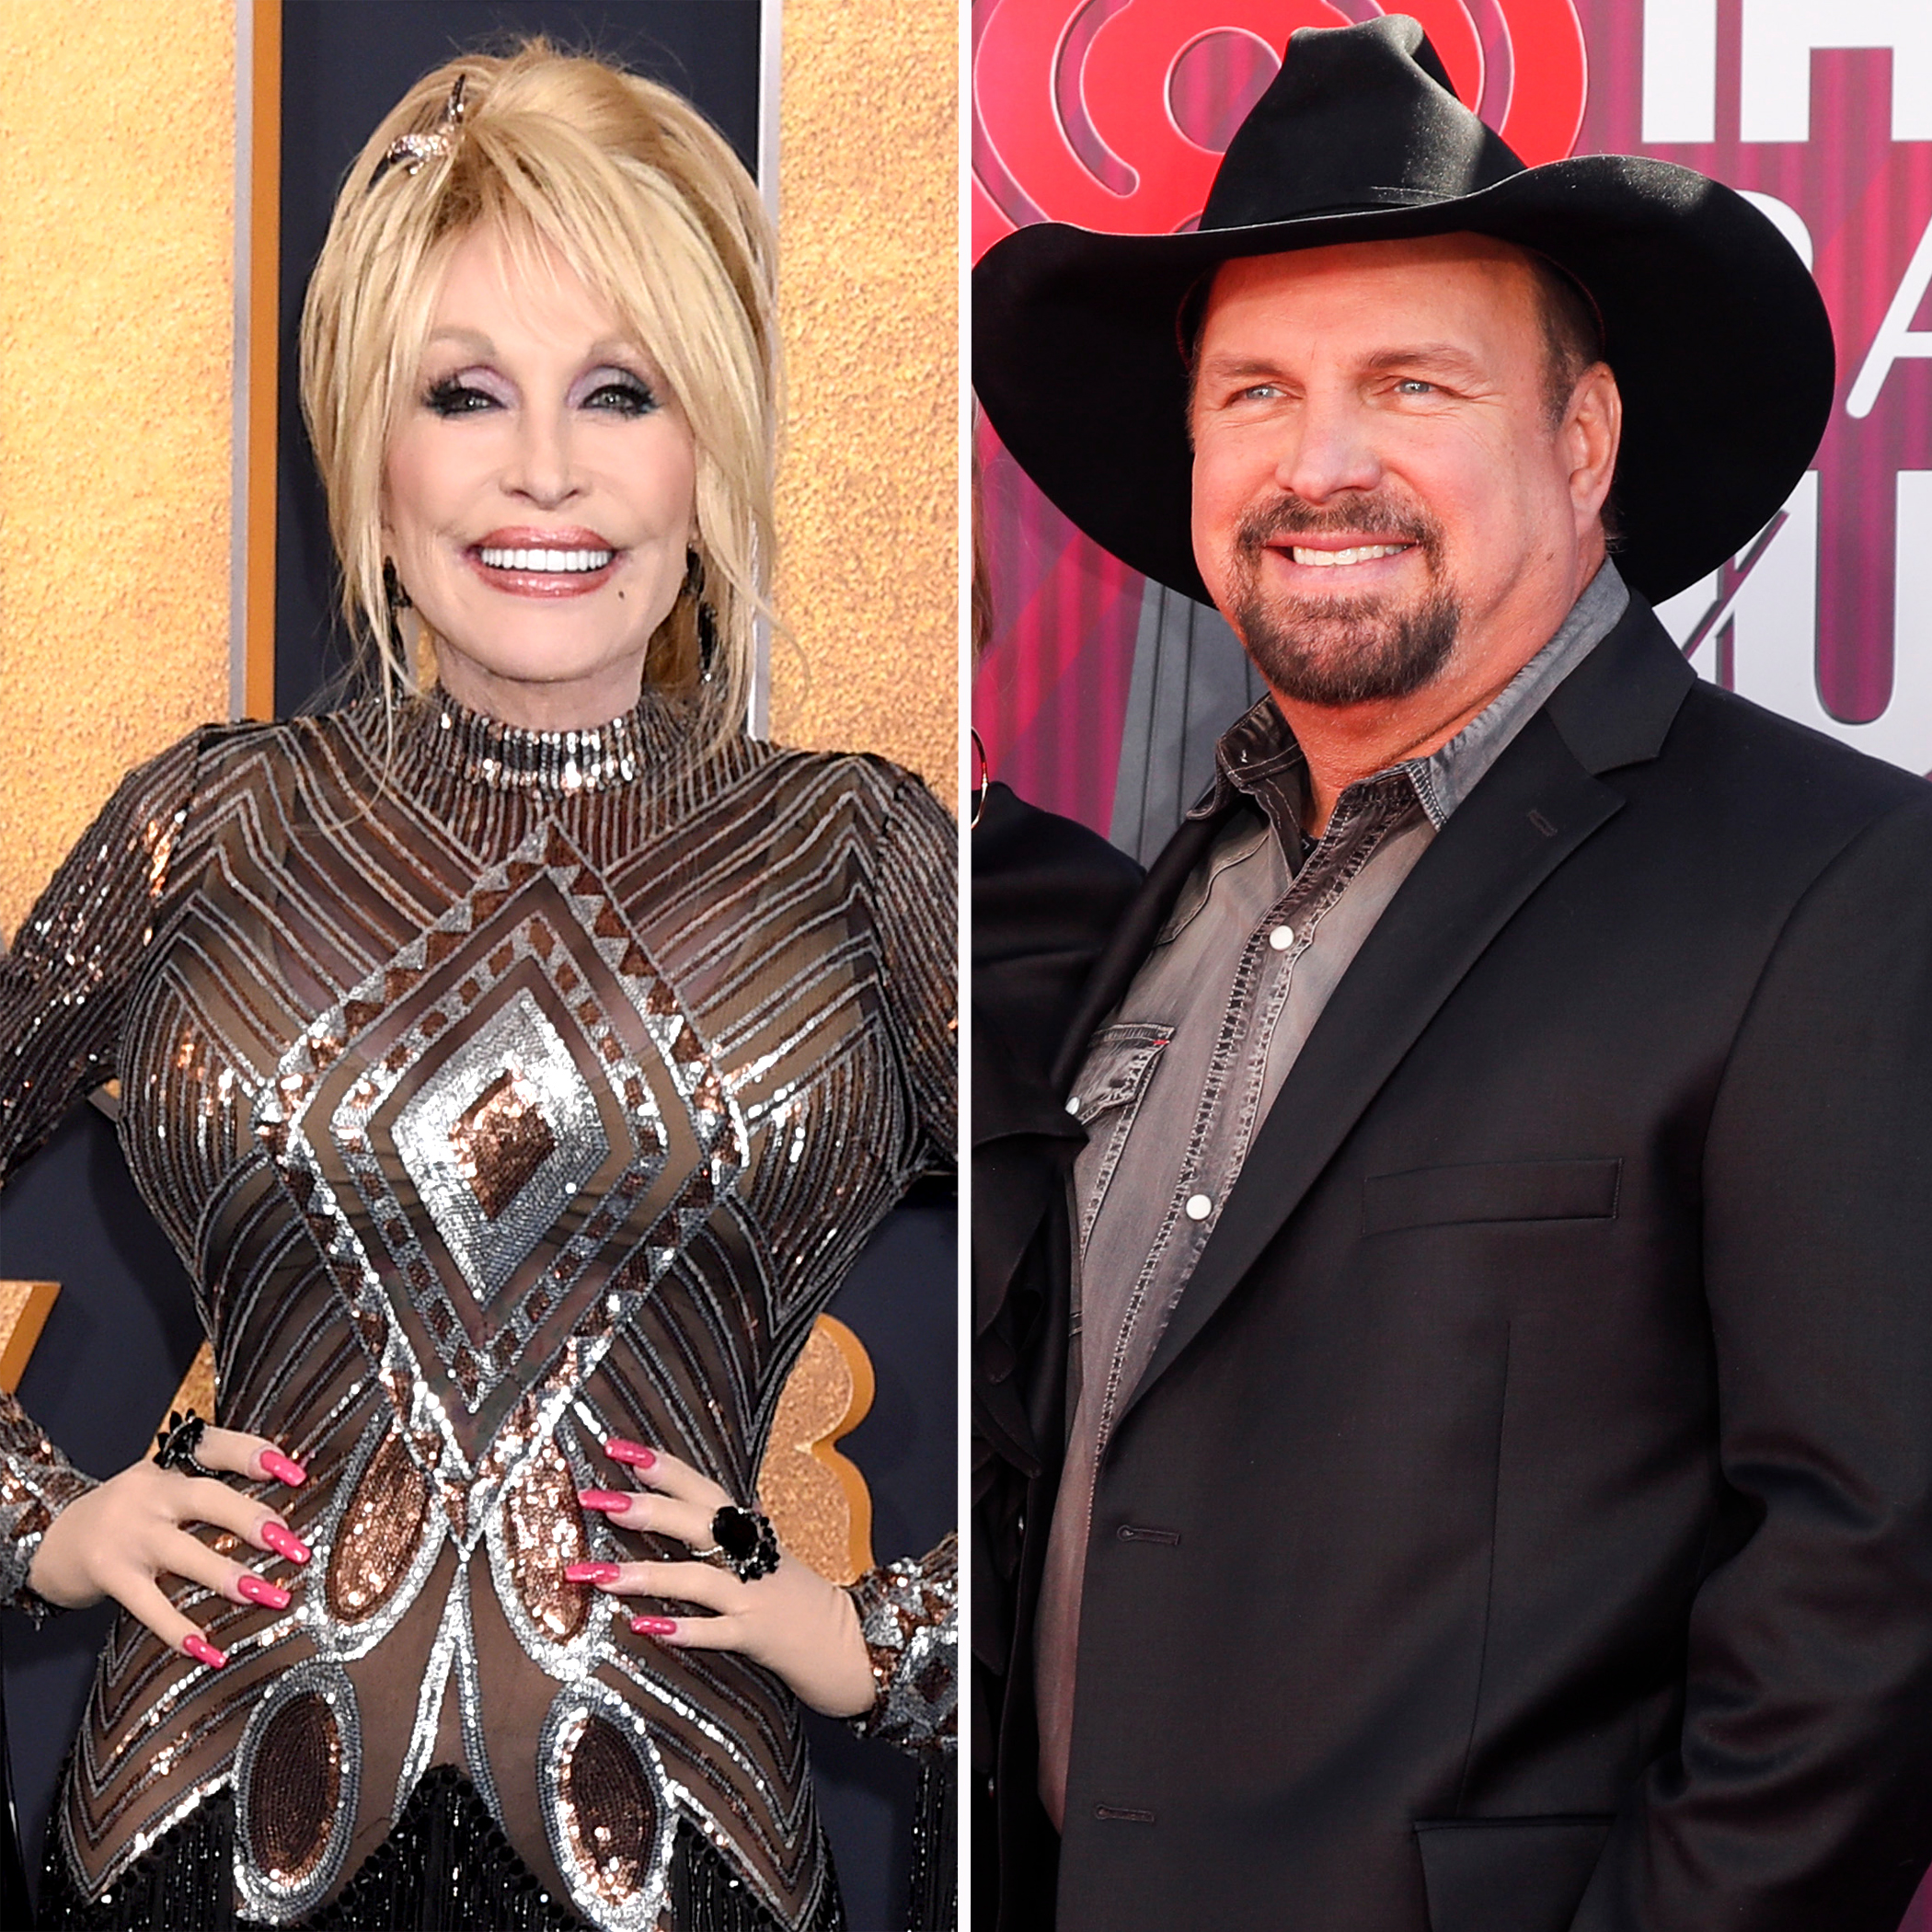 ACM Awards 2023: Dolly Parton, Garth Brooks Host and More to Know